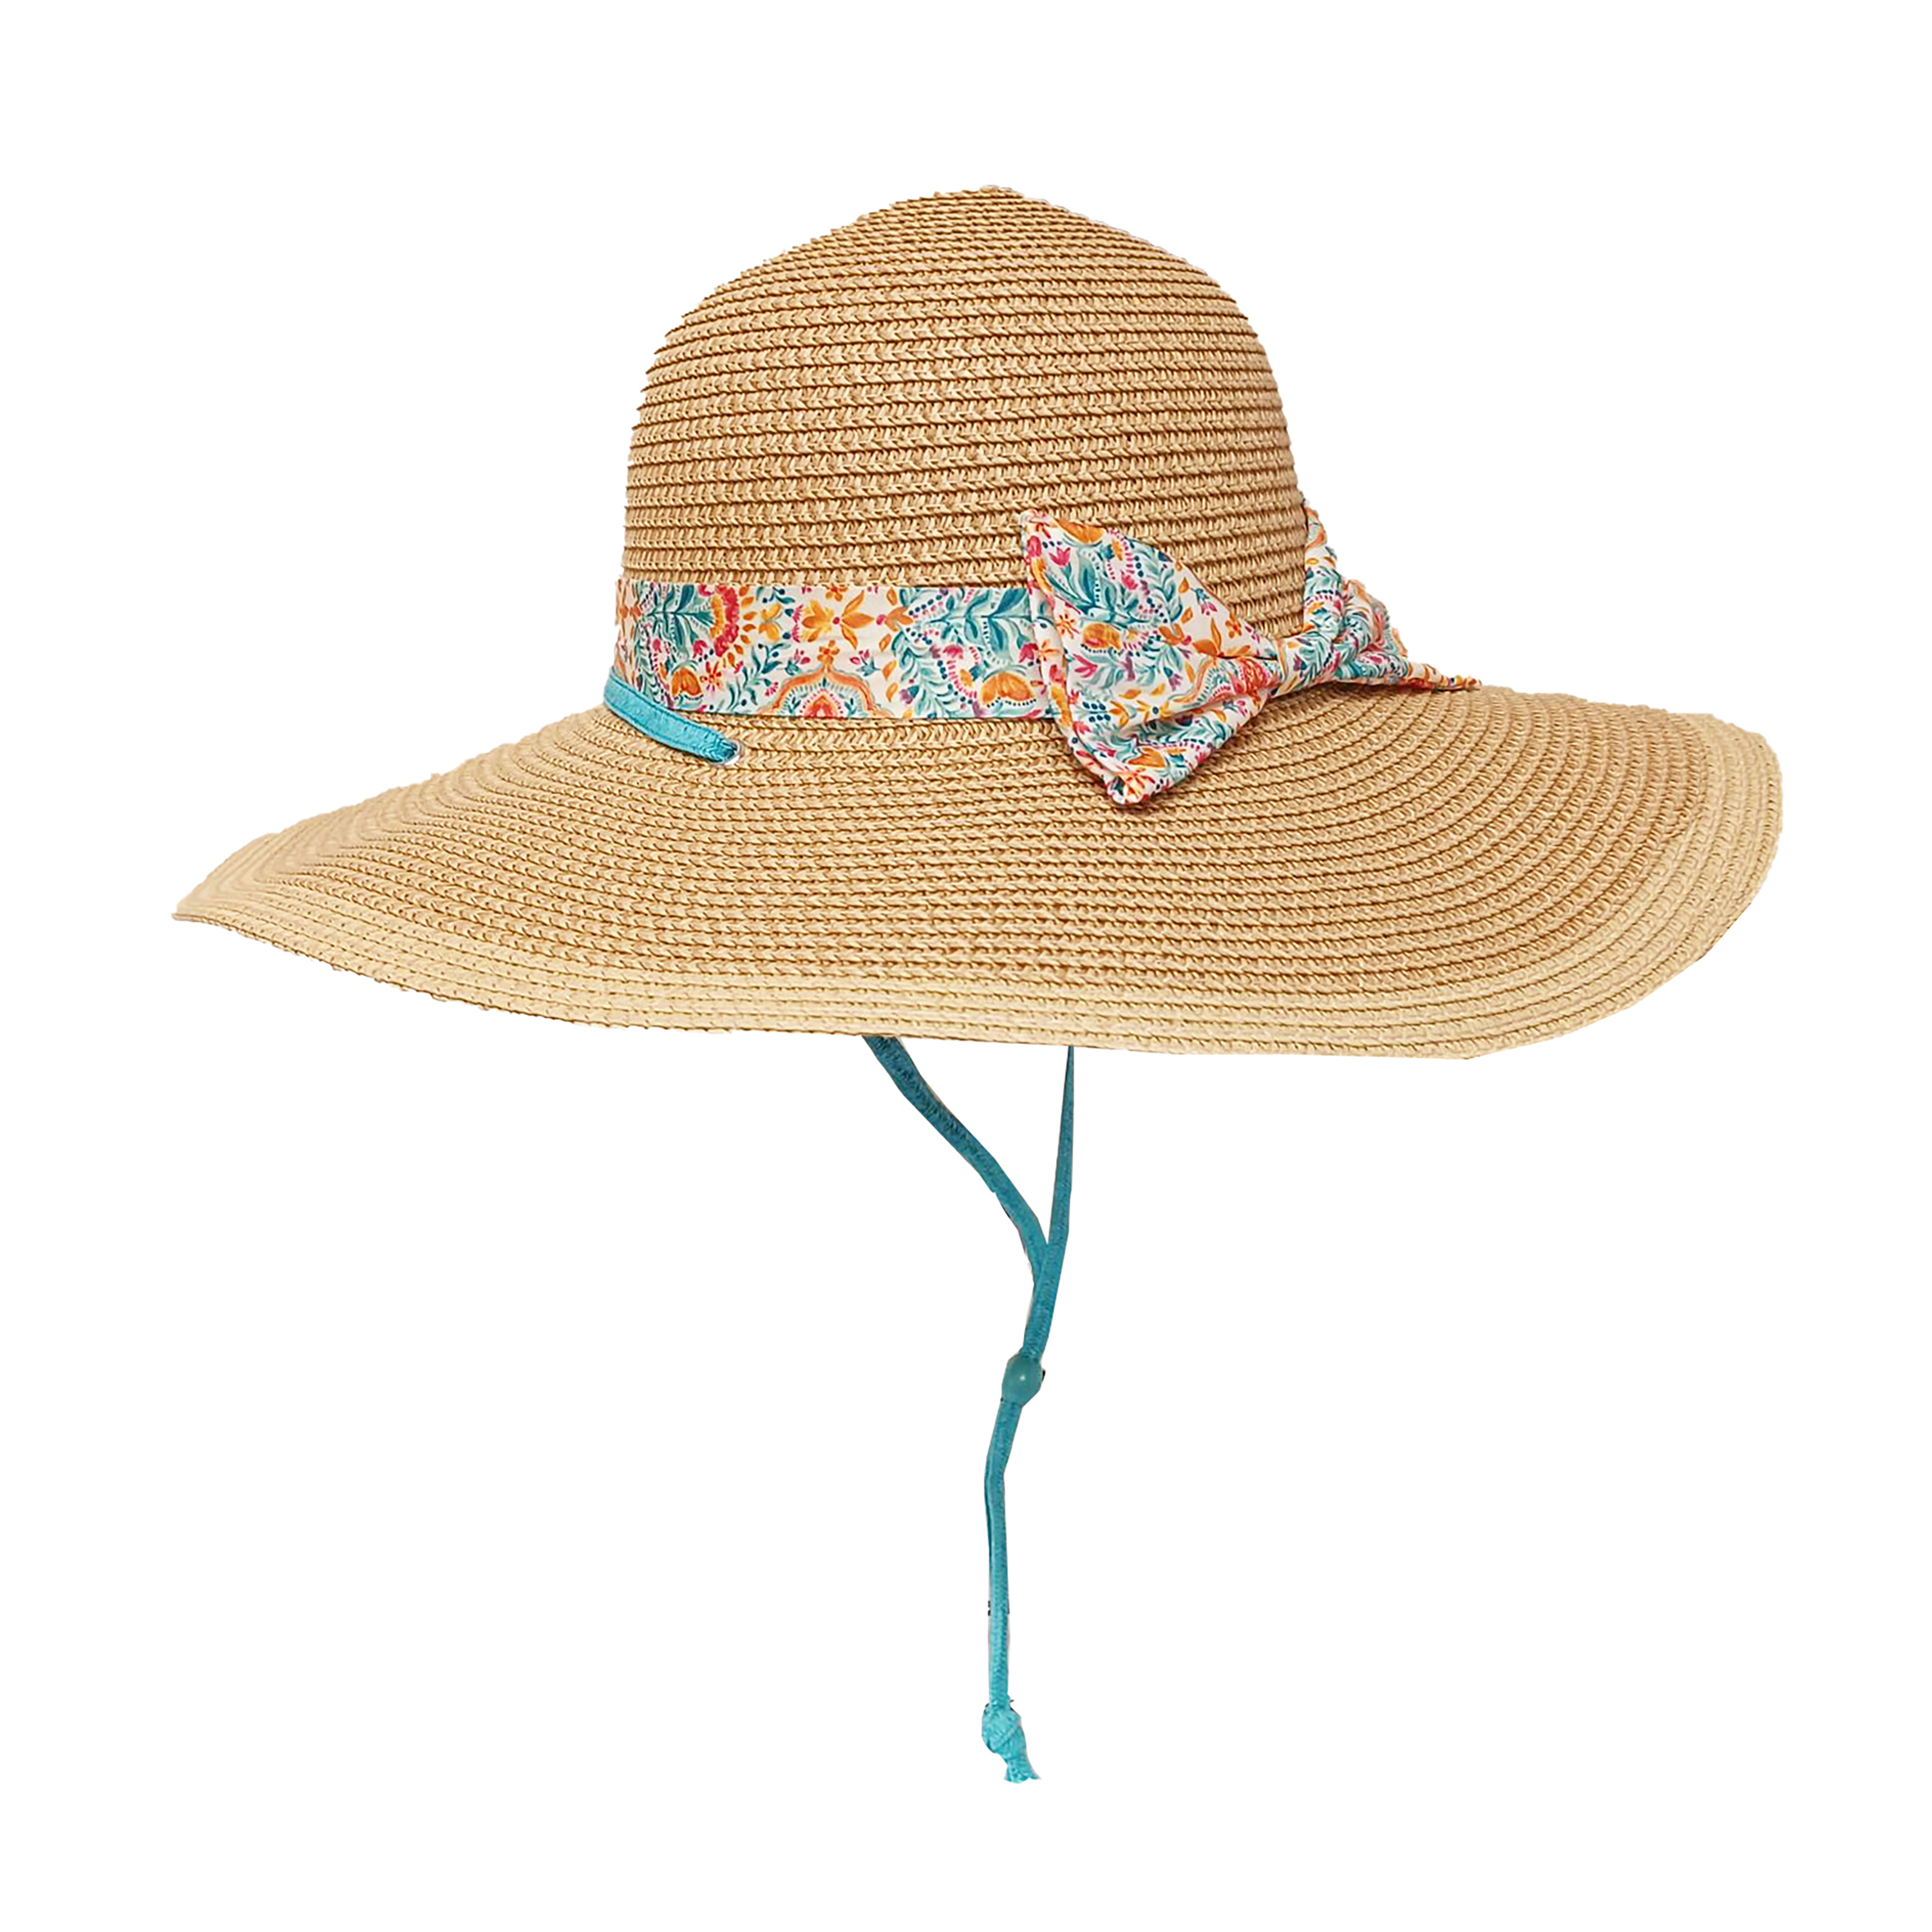 The Pioneer Woman Multicolor Folk Geo Gardening Hat, One Size Fits Most - image 1 of 9